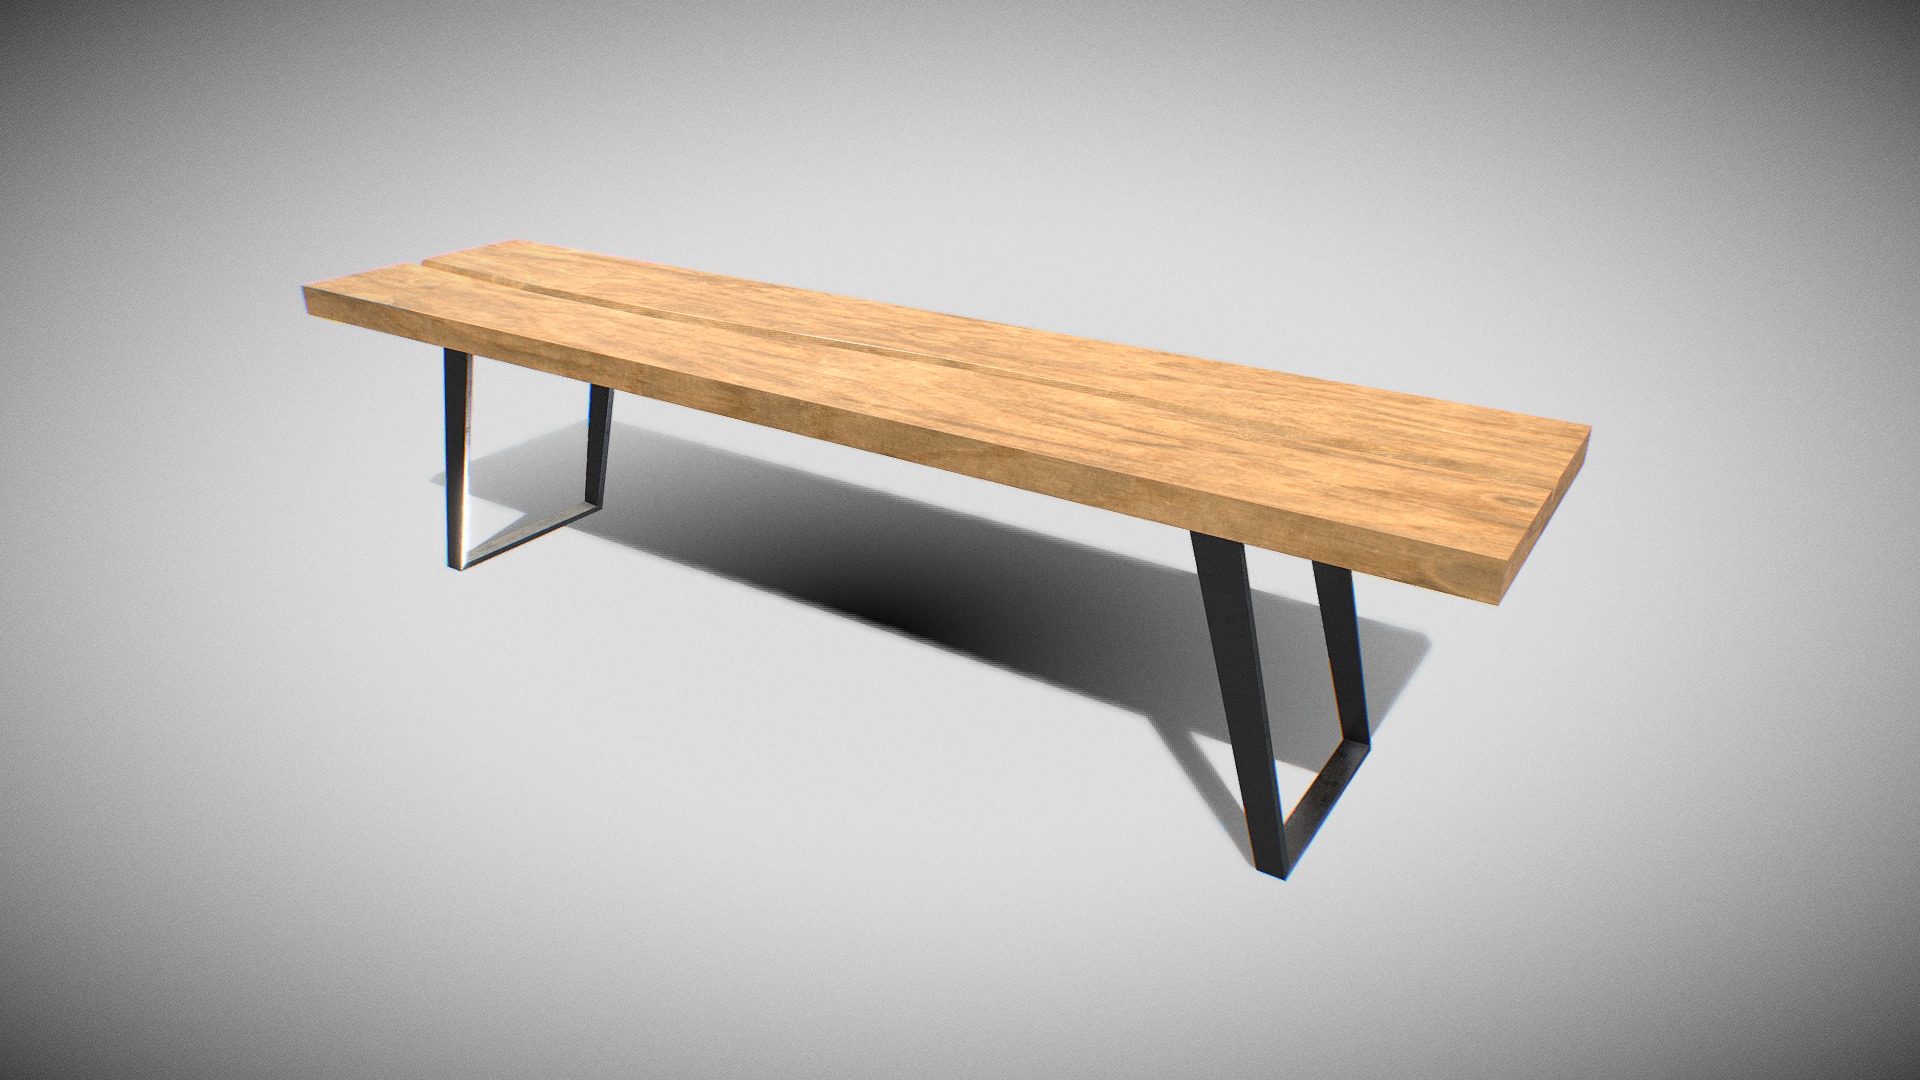 3D model Bench woooden 03 - This is a 3D model of the Bench woooden 03. The 3D model is about a wooden table with a white background.